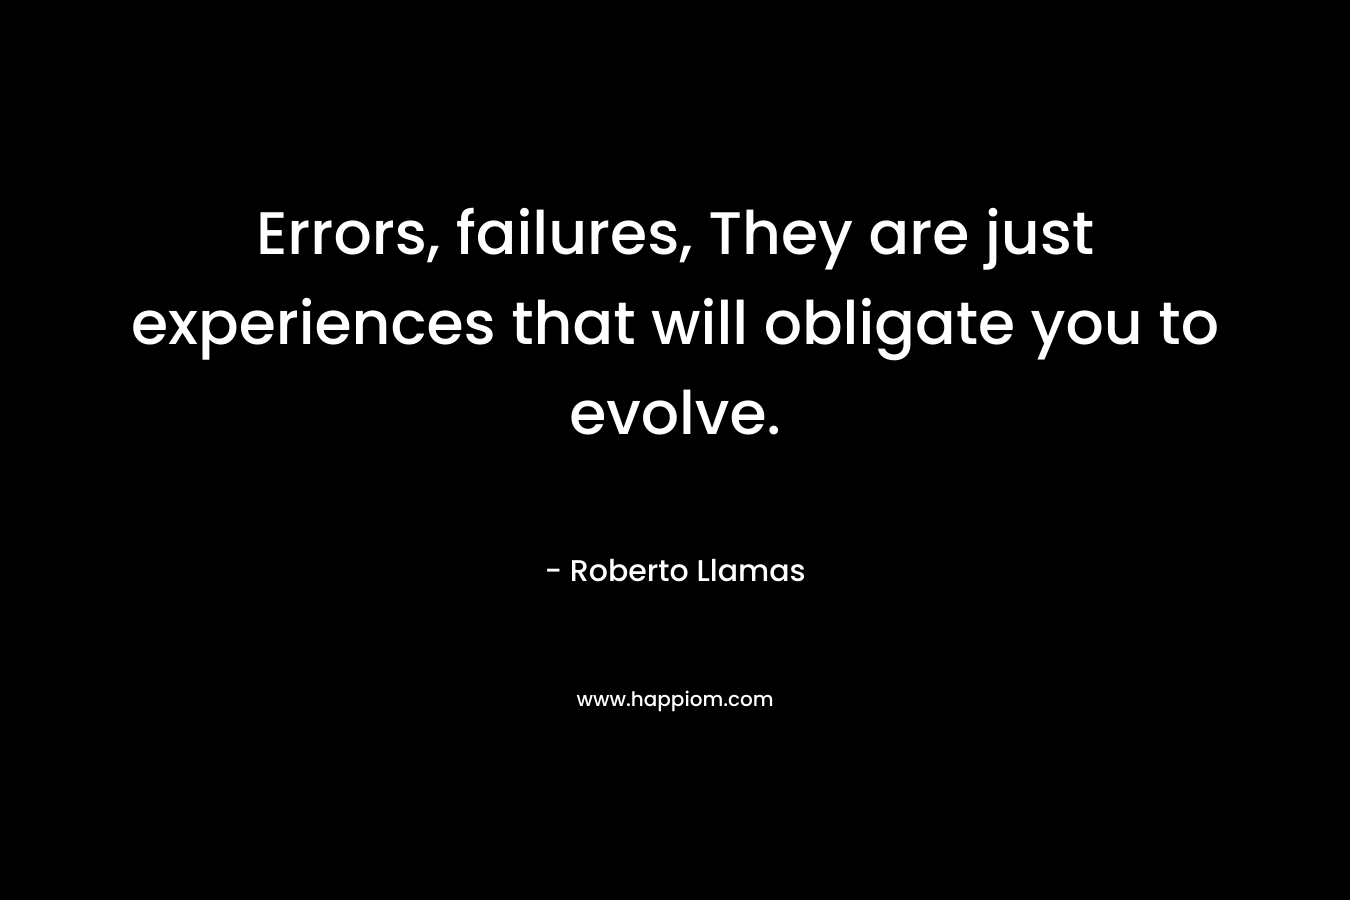 Errors, failures, They are just experiences that will obligate you to evolve. – Roberto Llamas